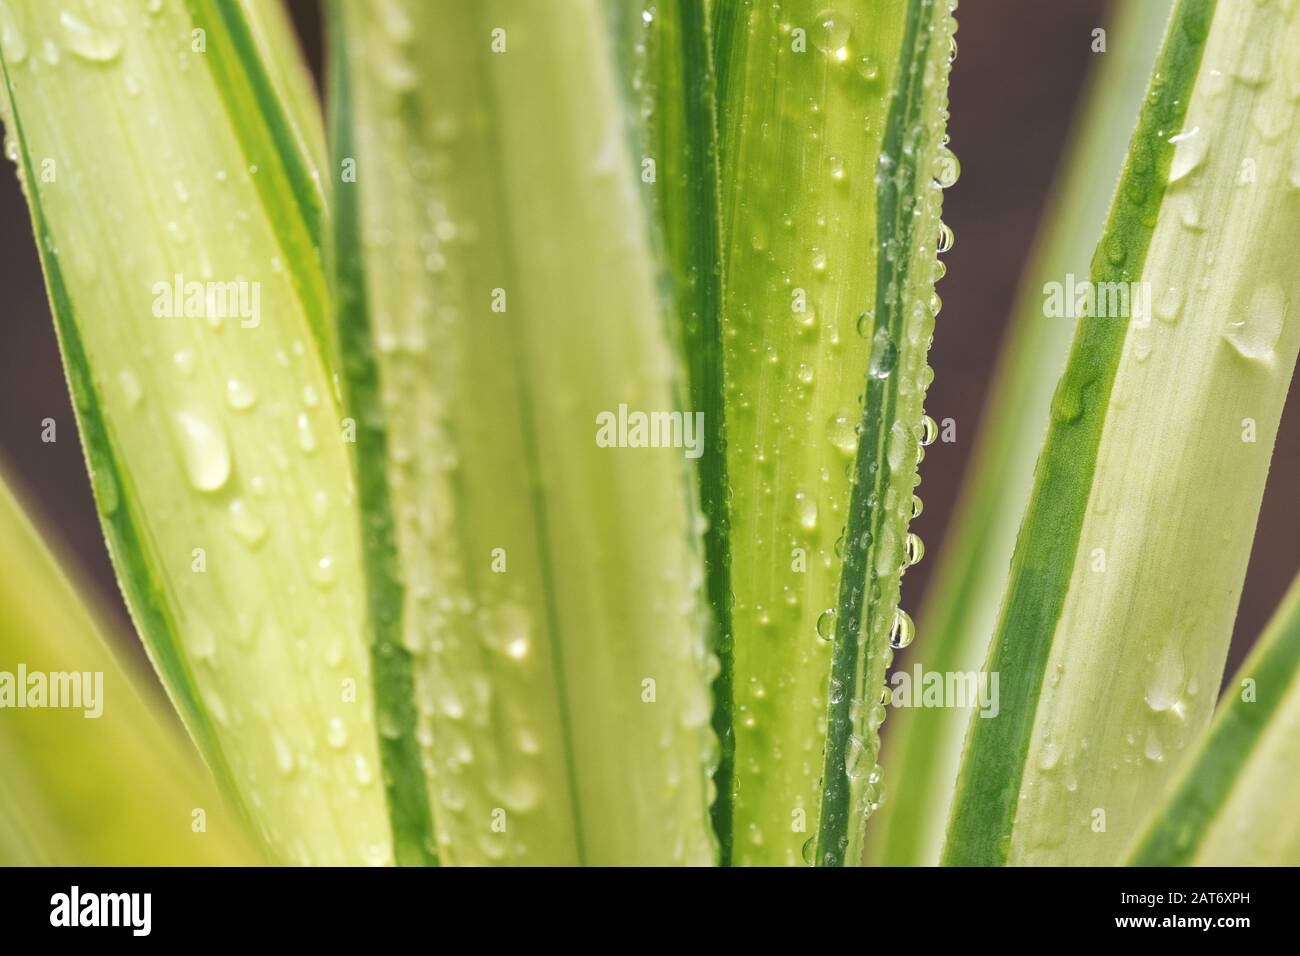 Close up of fresh water droplets on the leaves of a lush, green yucca plant Stock Photo